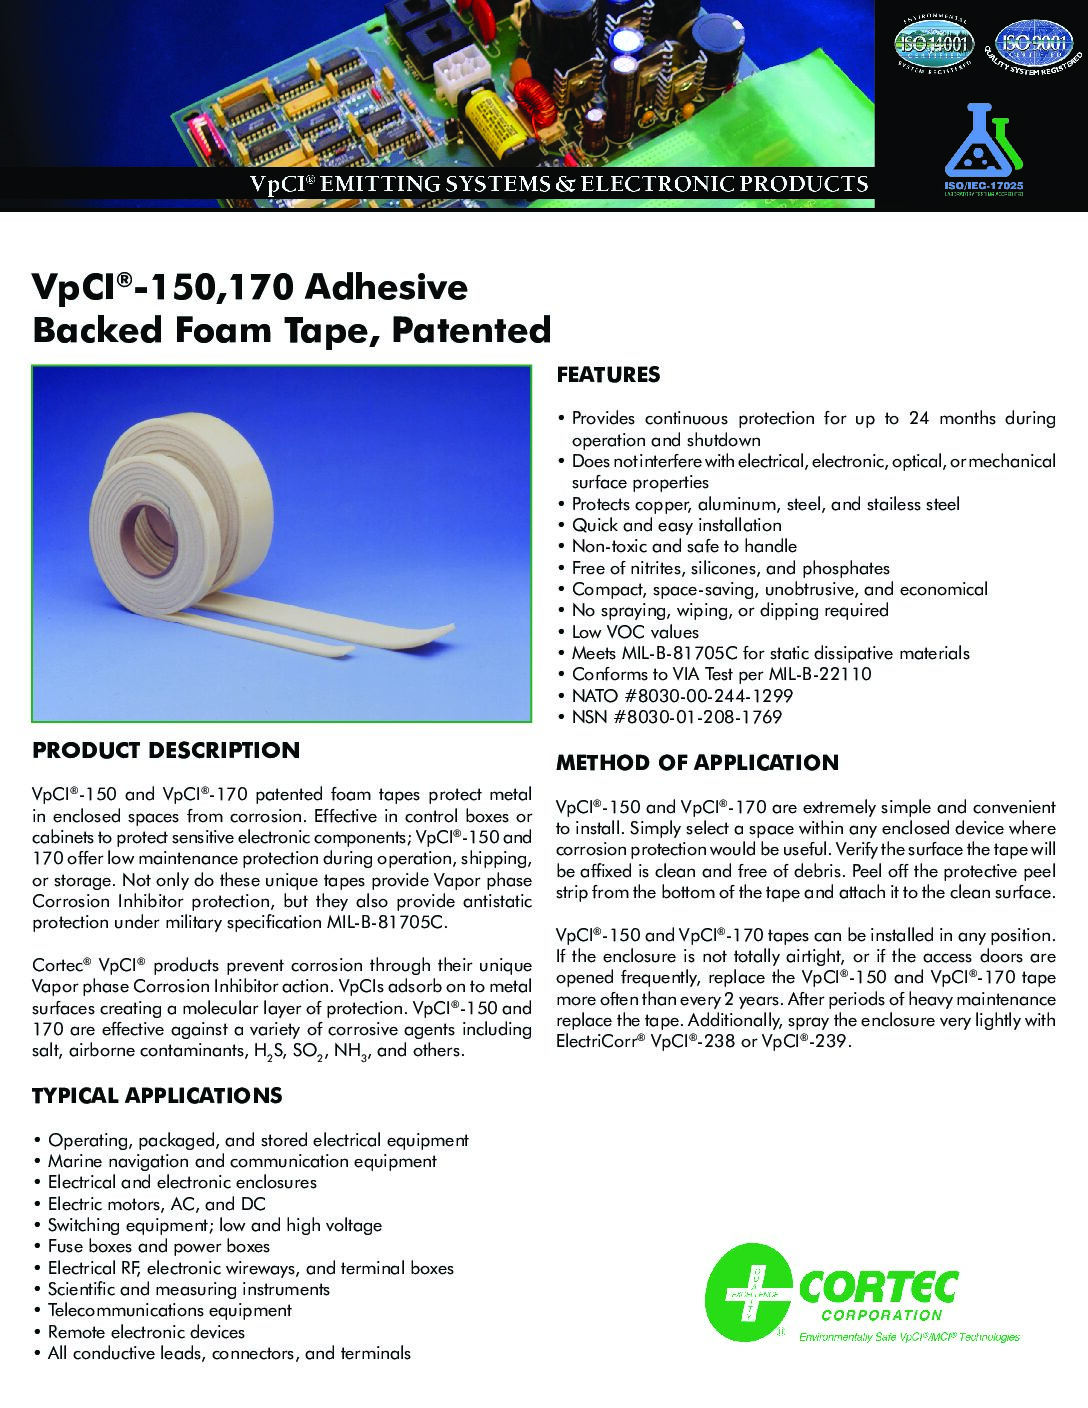 VpCI®-150 Adhesive Backed Foam Tape Emitter - Solvent Recycling Systems ...